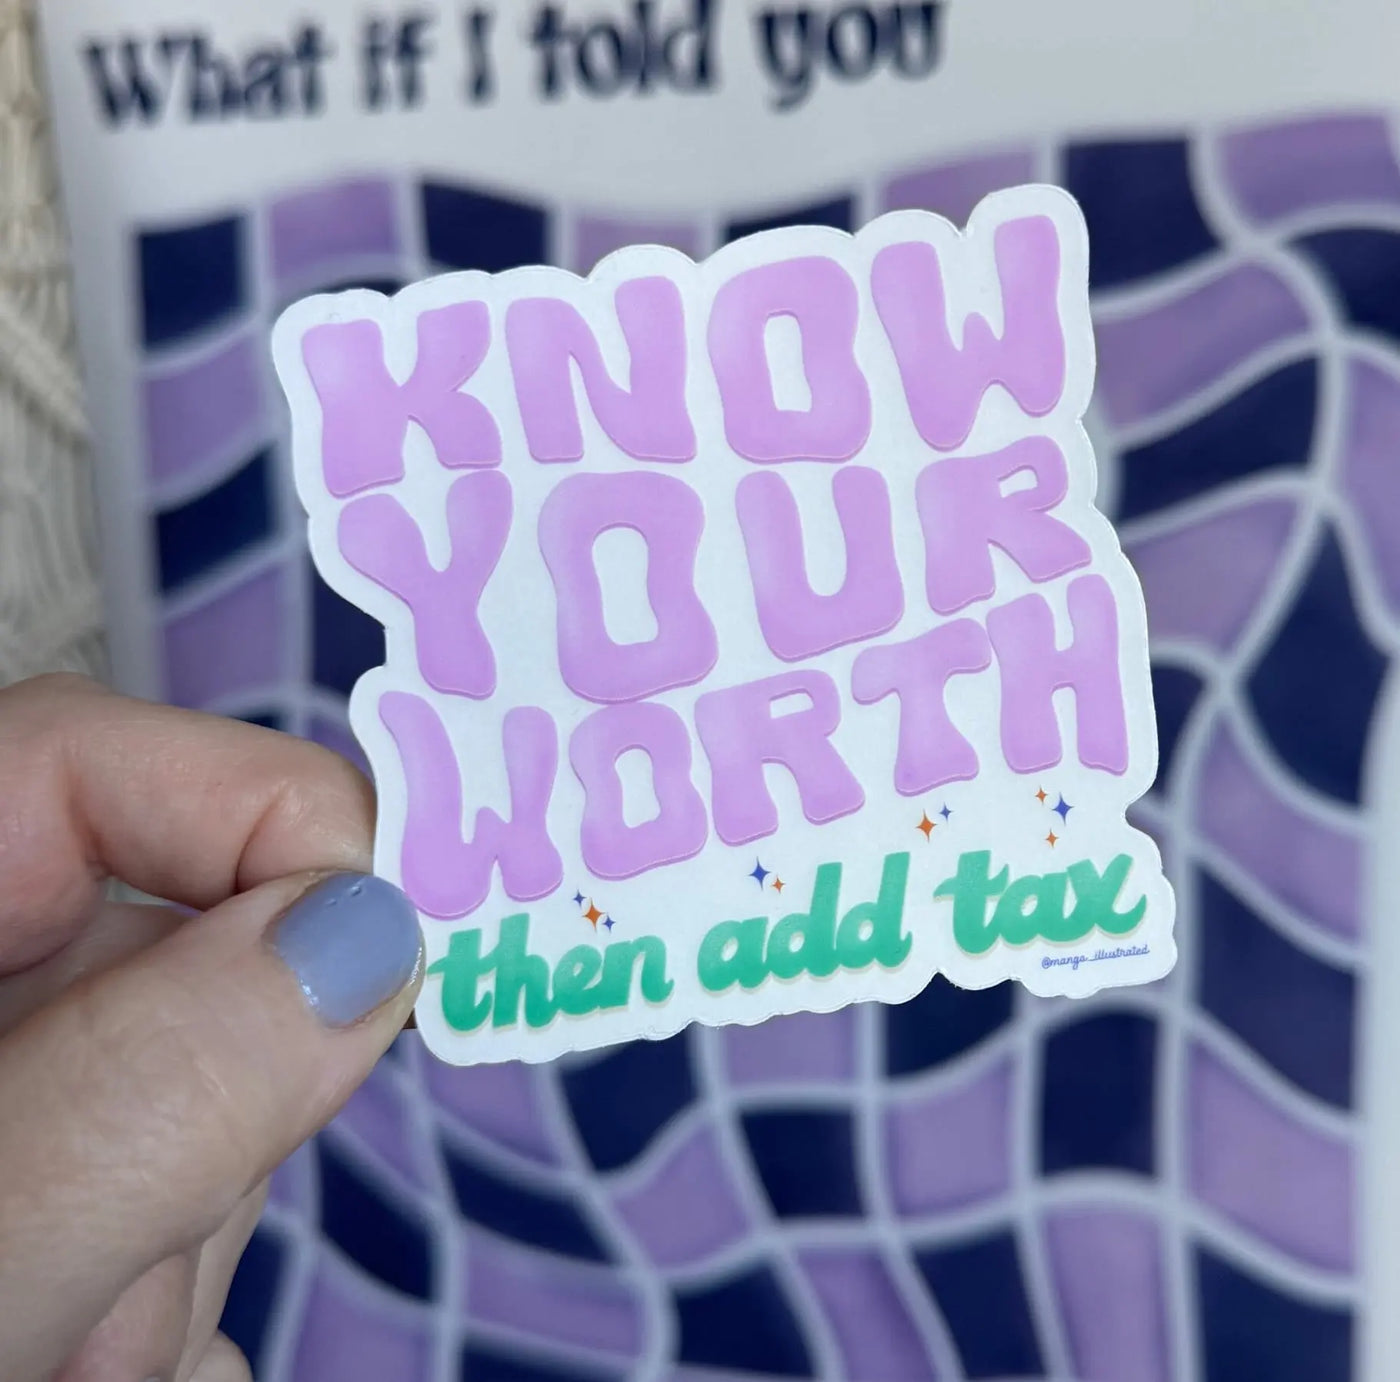 CLEAR Know your worth then add tax sticker MangoIllustrated